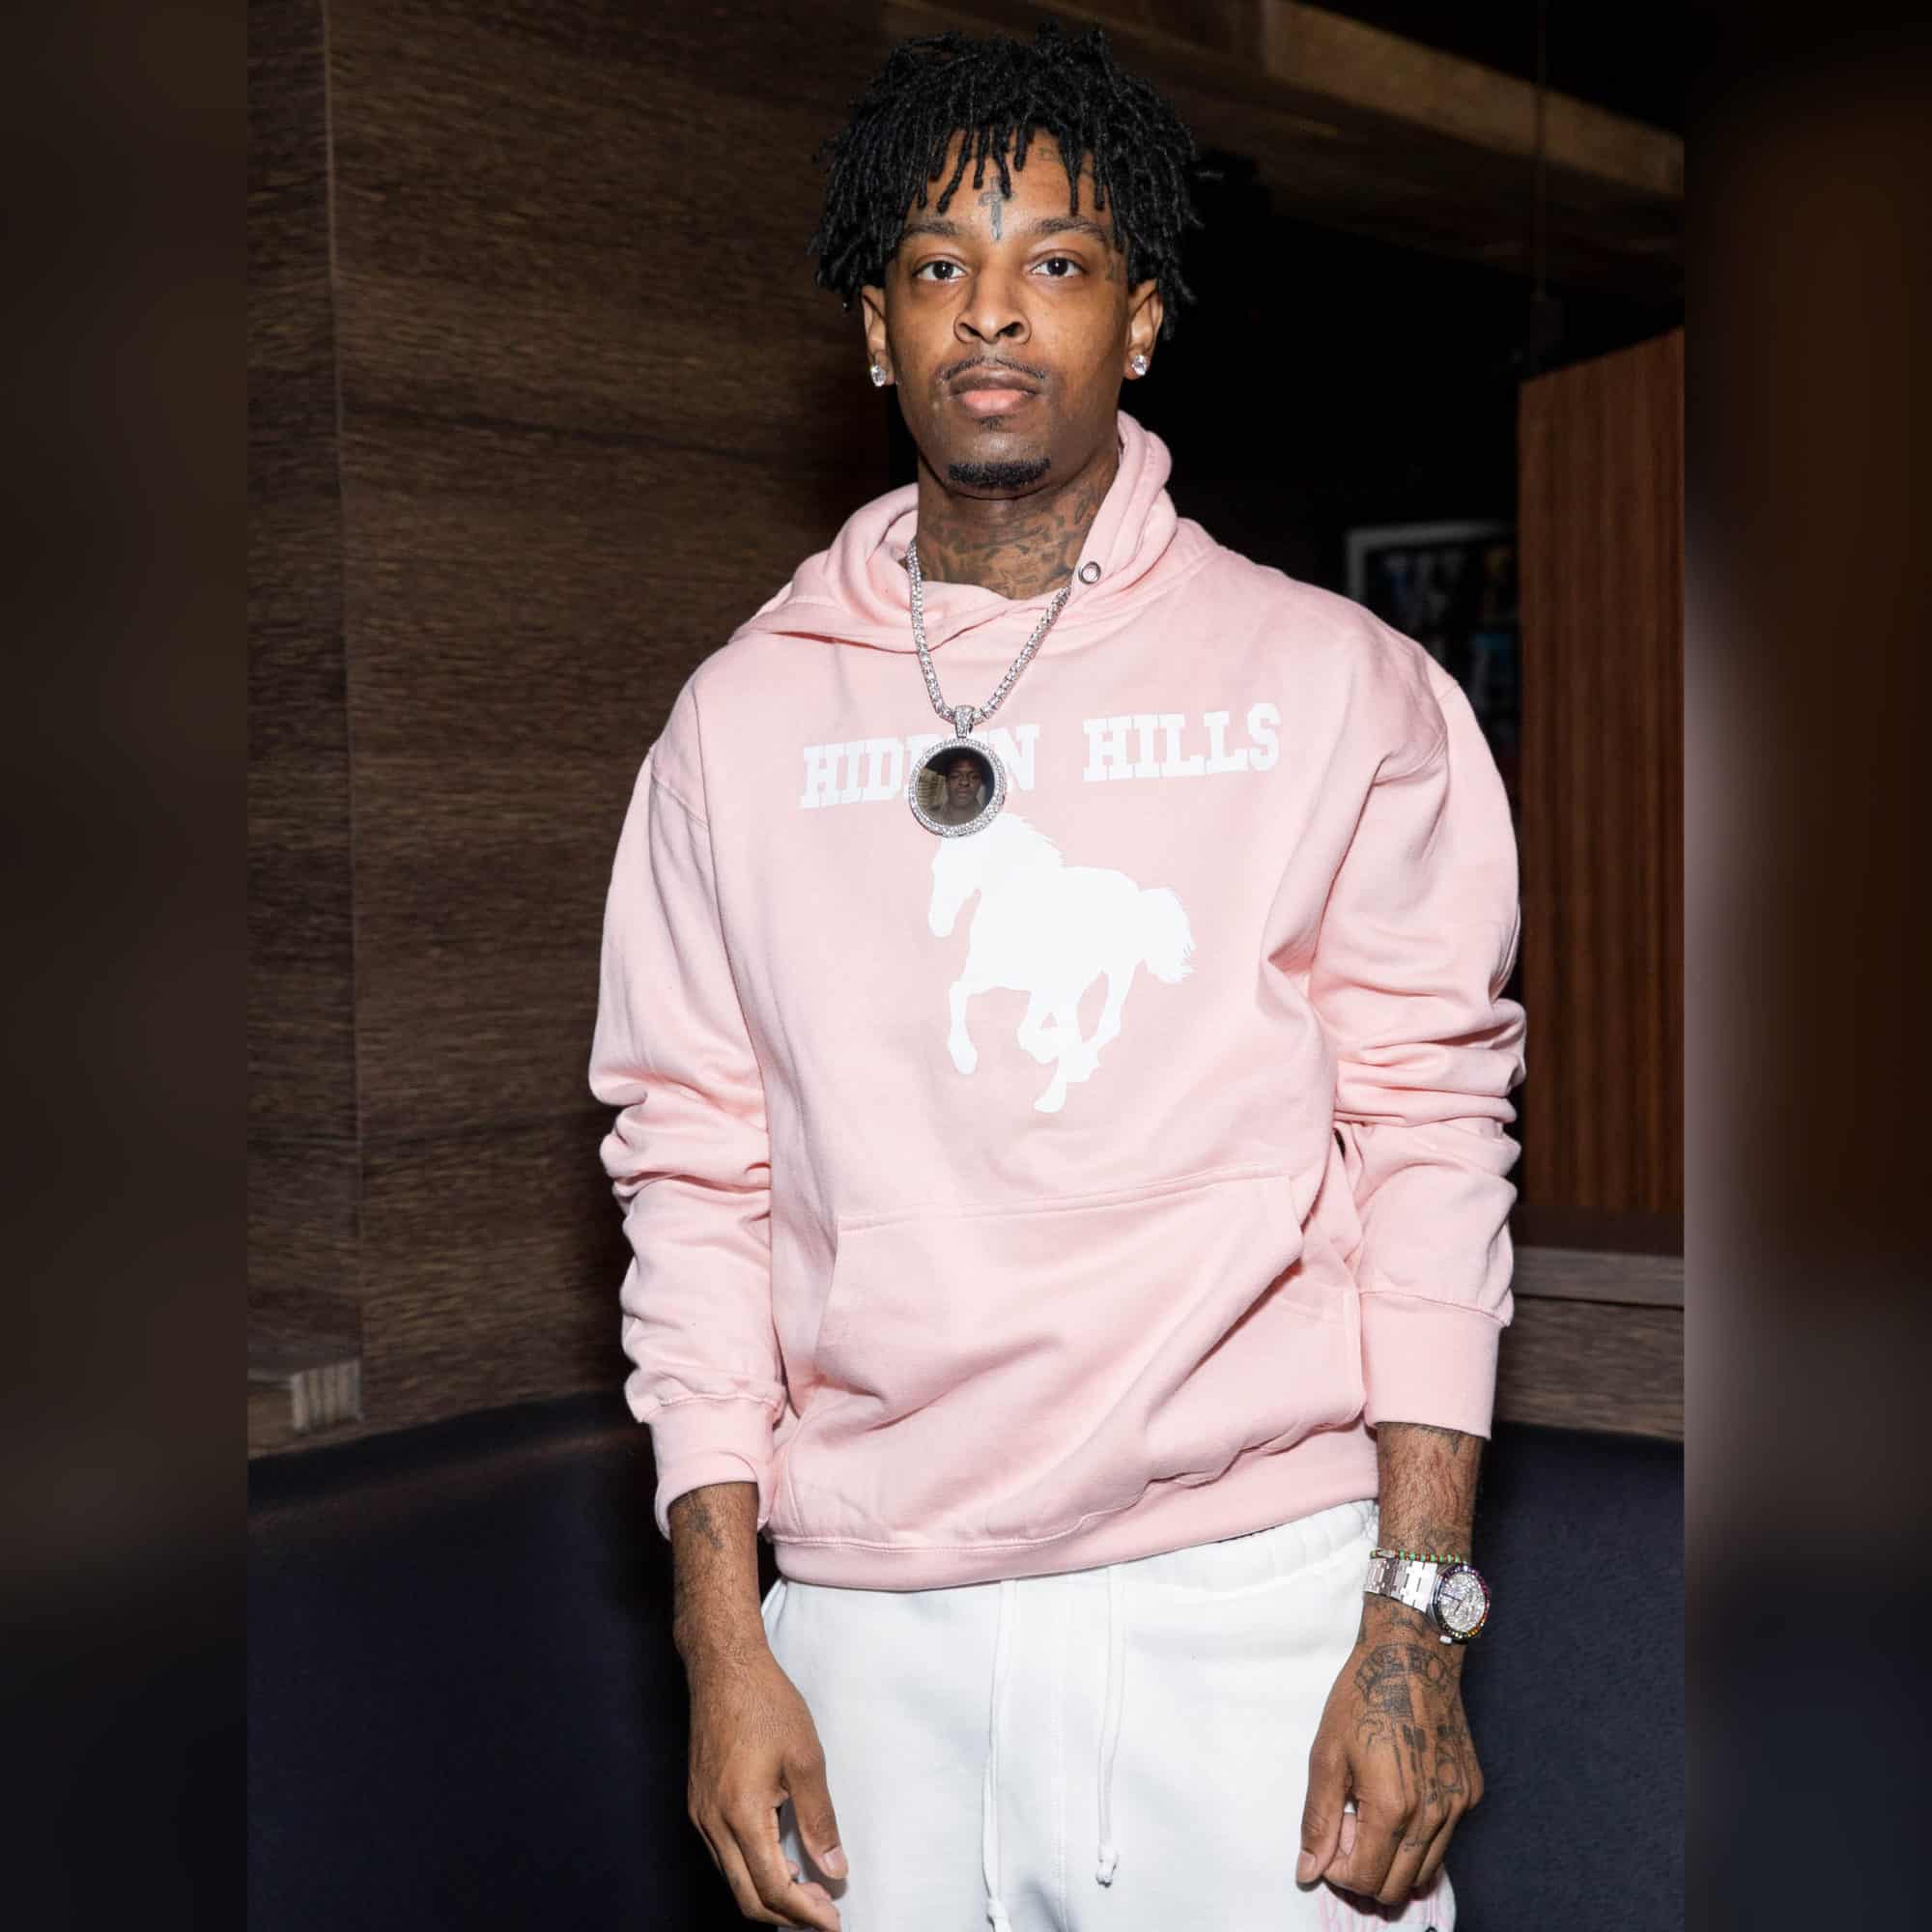 21 Savage Shares His Top Five List Of Greatest R&B Artists Of All